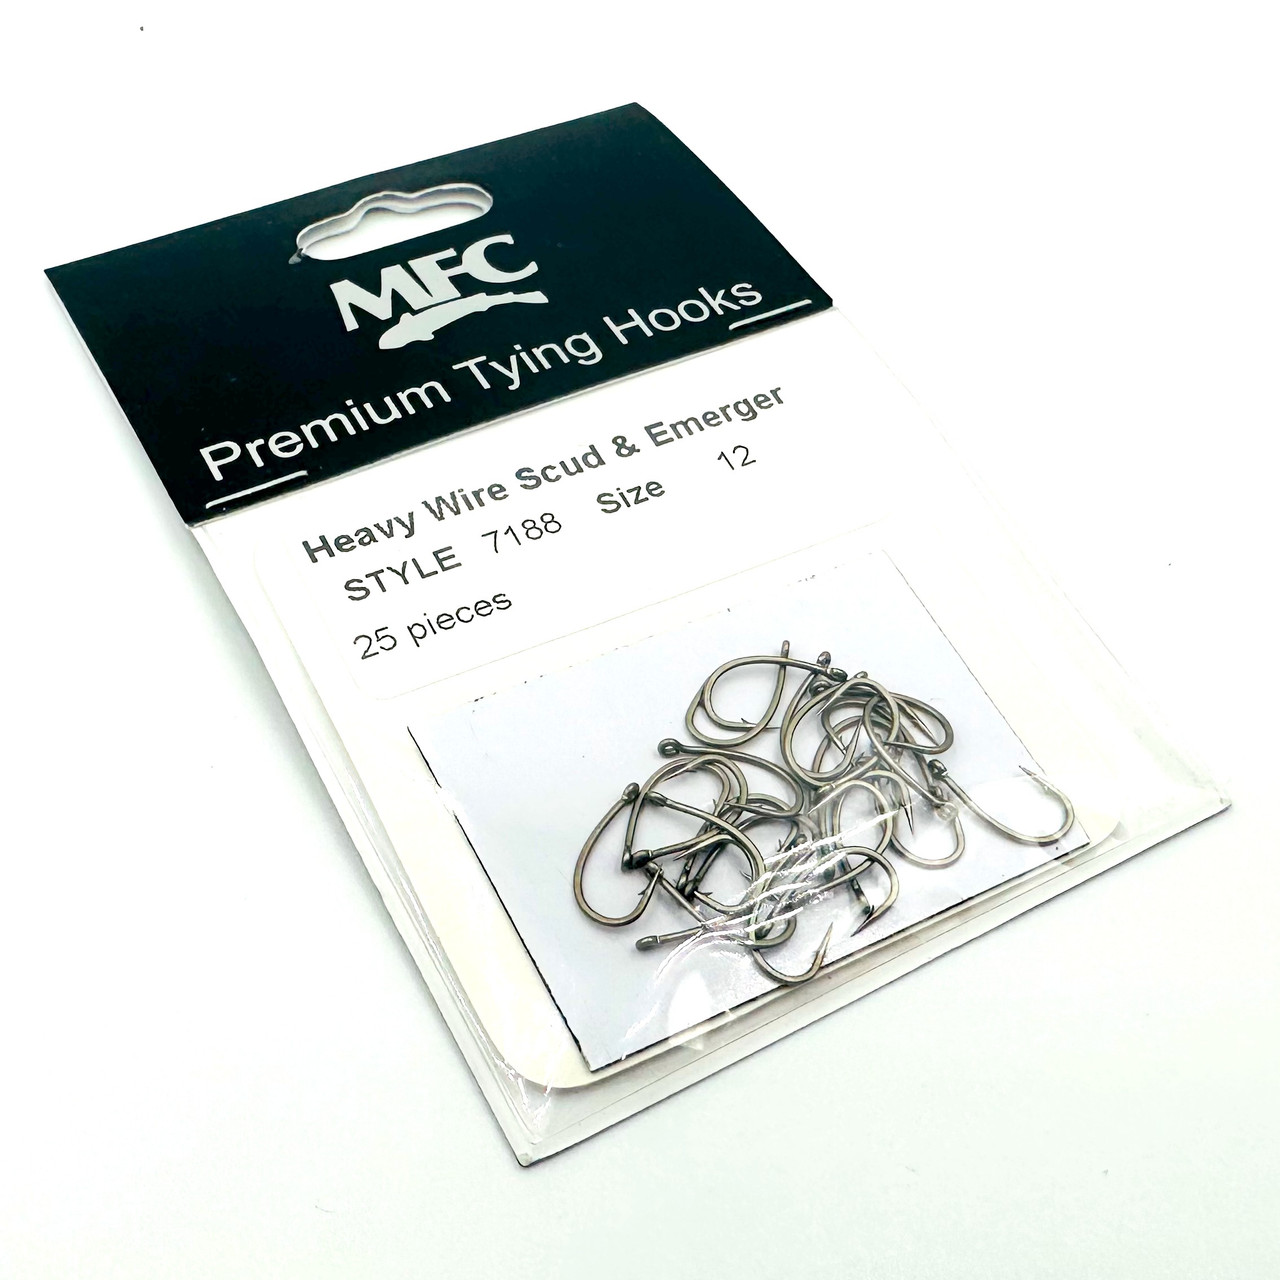 MFC HEAVY WIRE SCUD & EMERGER #7188 FLY HOOK